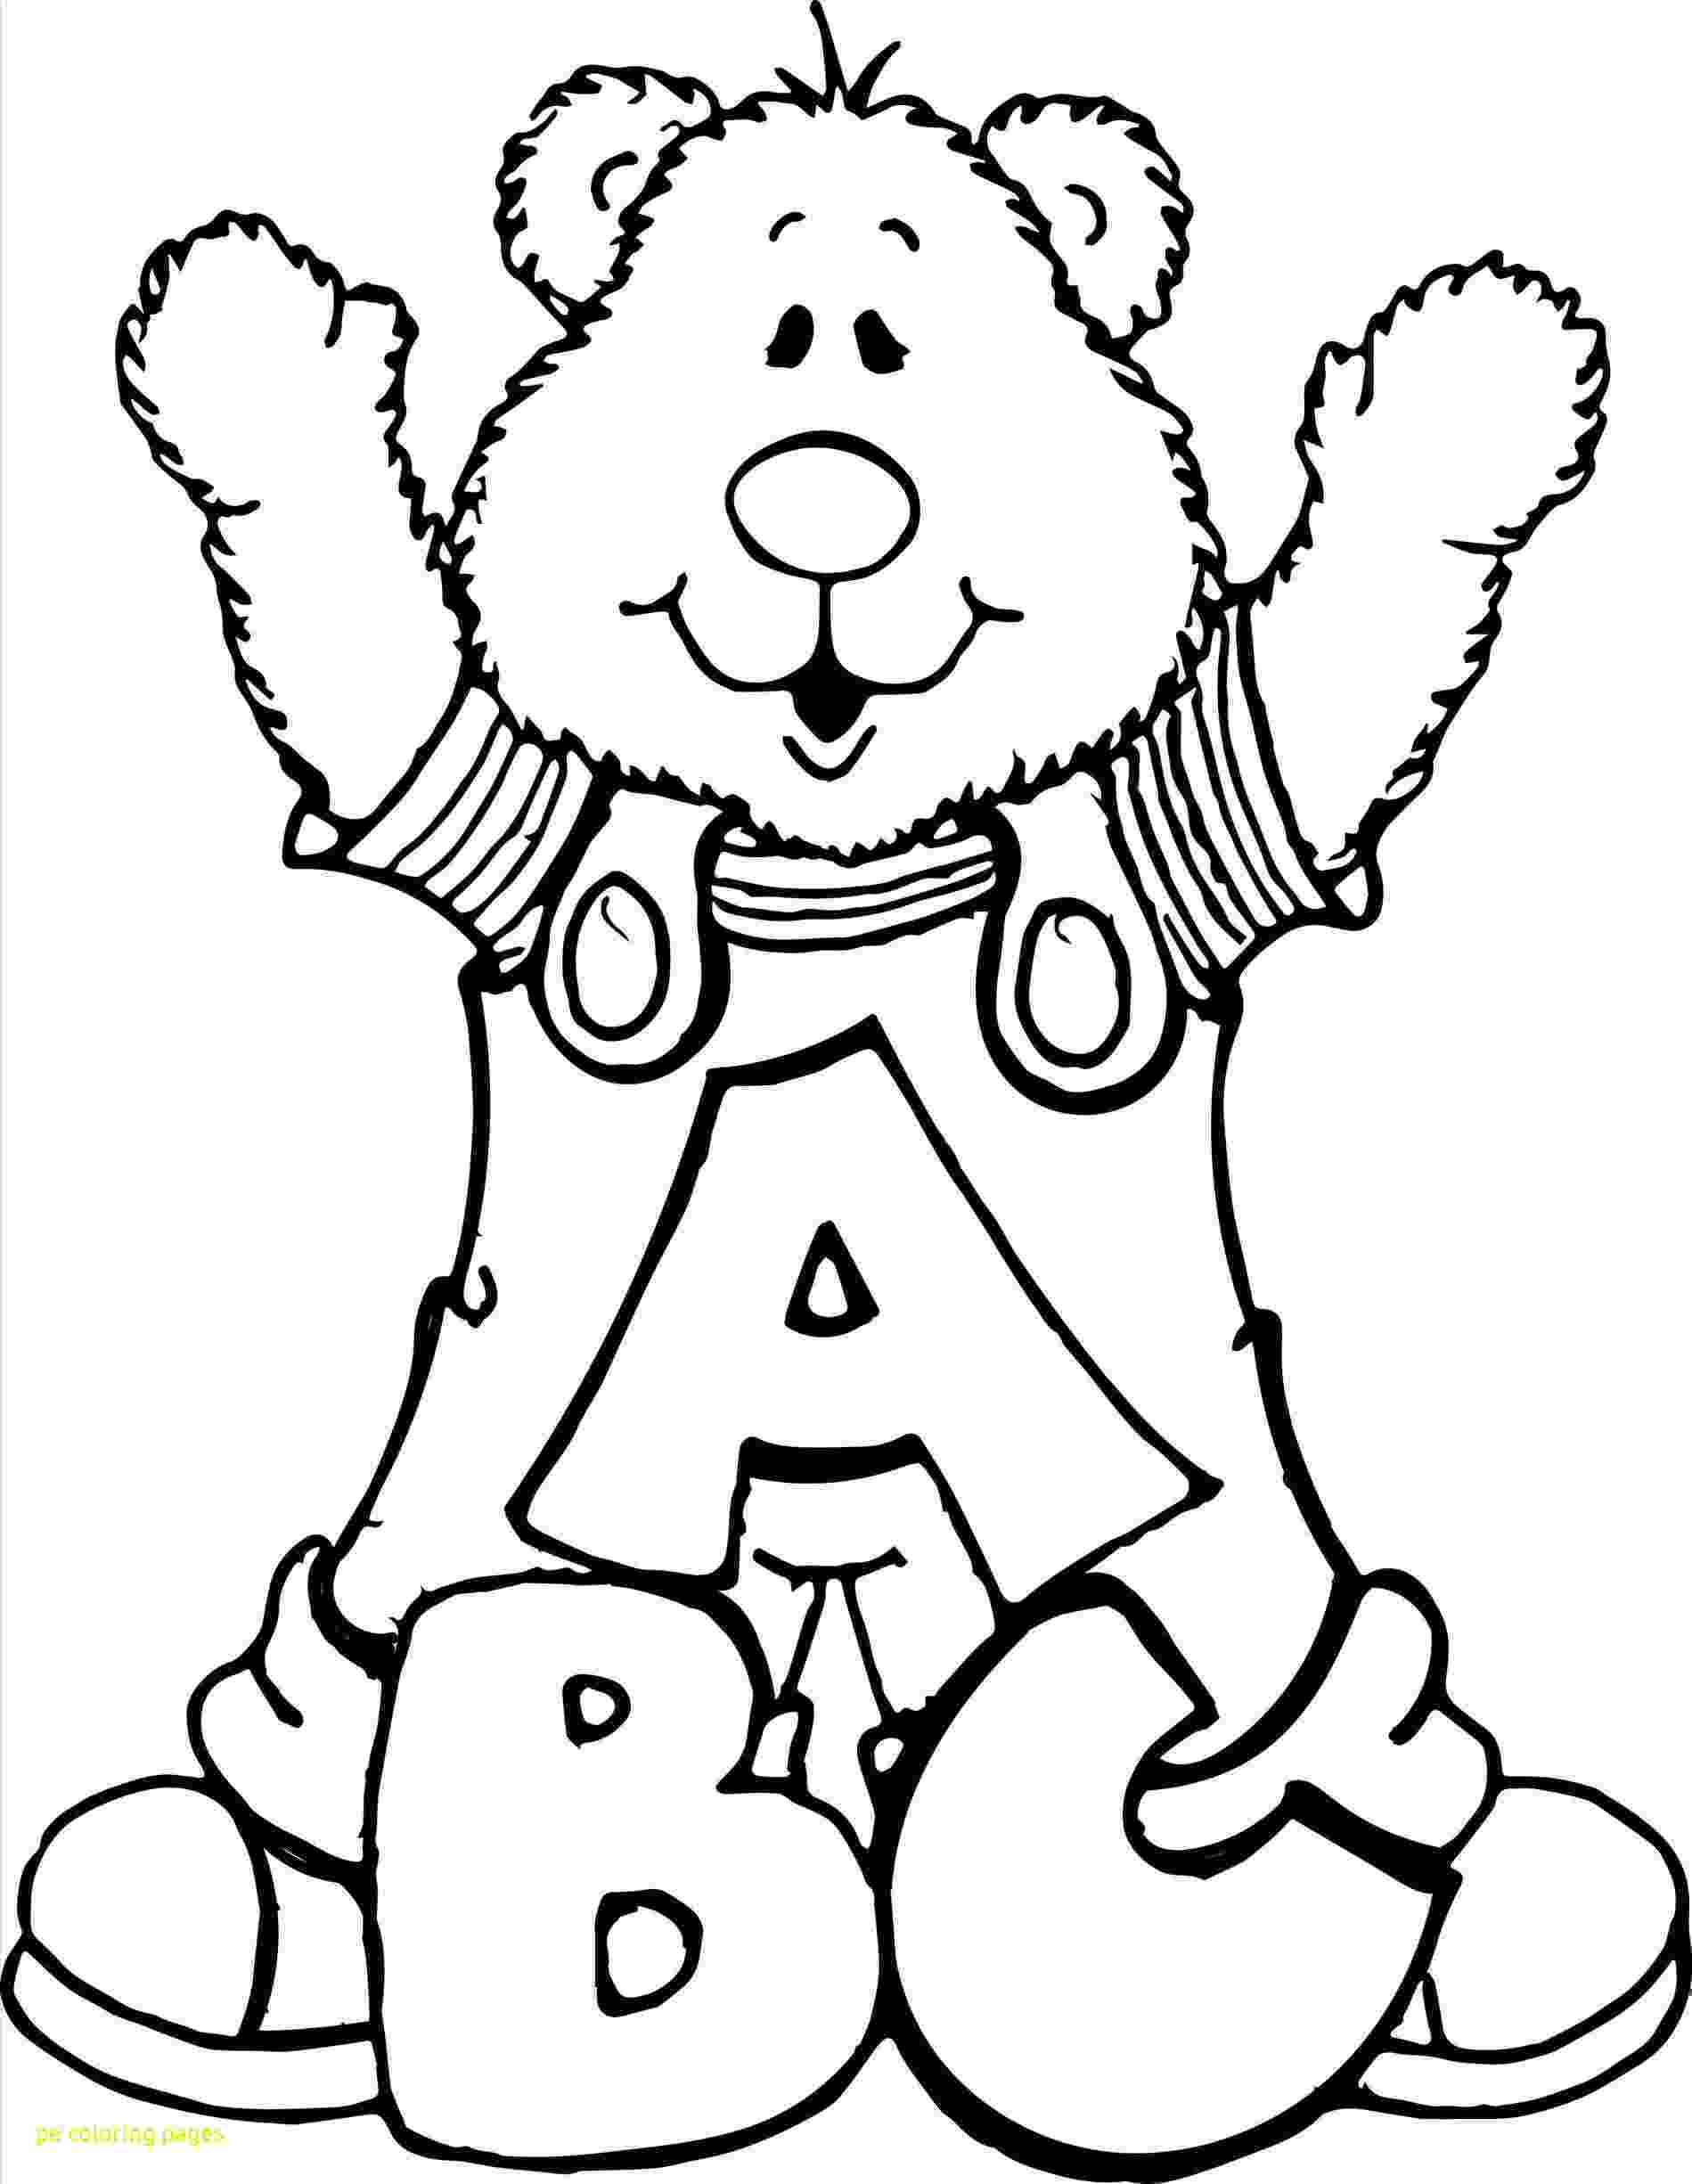 pe coloring pages infernape coloring pages at getcoloringscom free pages coloring pe 